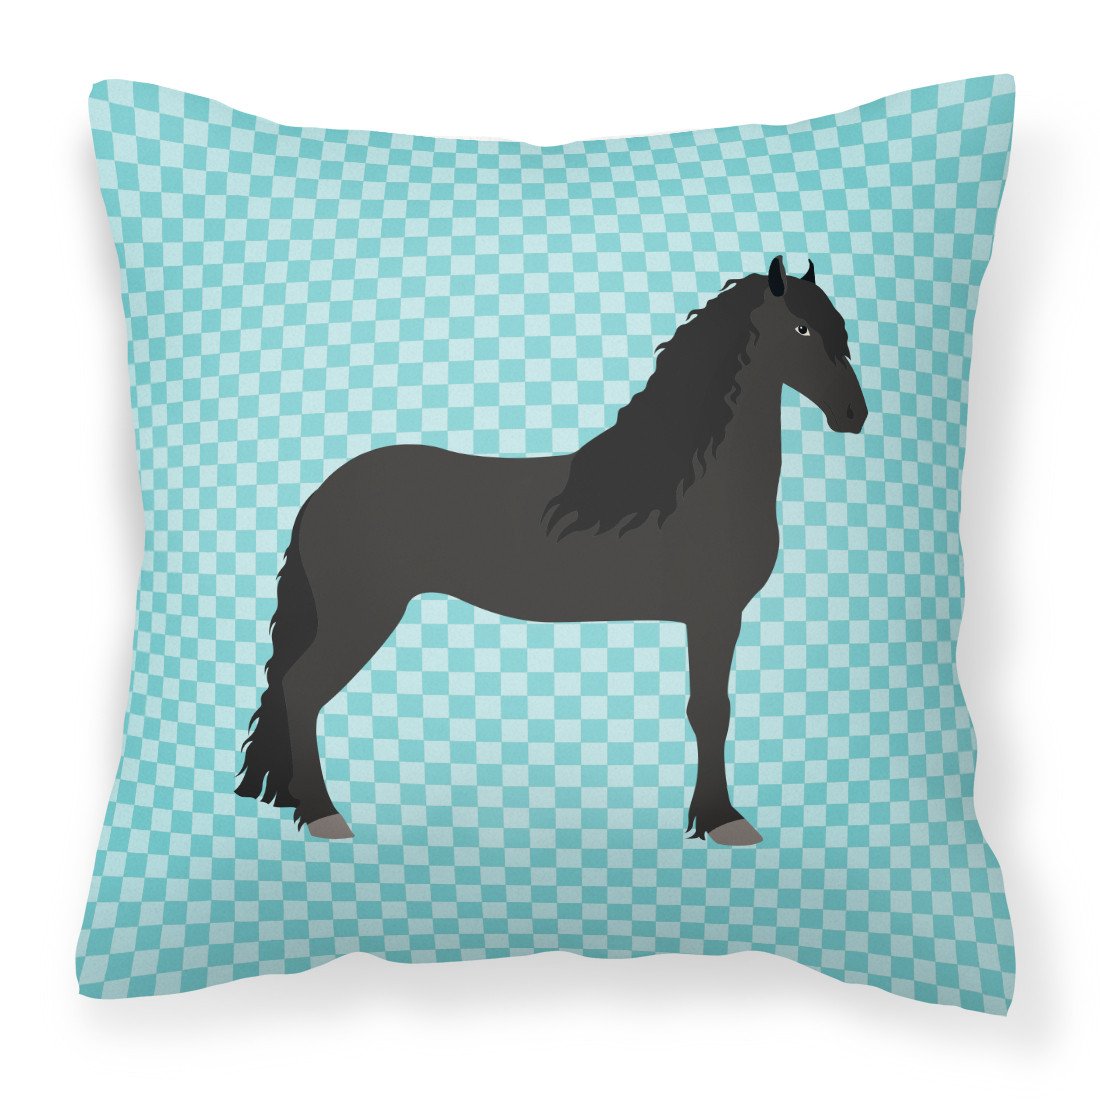 Friesian Horse Blue Check Fabric Decorative Pillow BB8089PW1818 by Caroline's Treasures